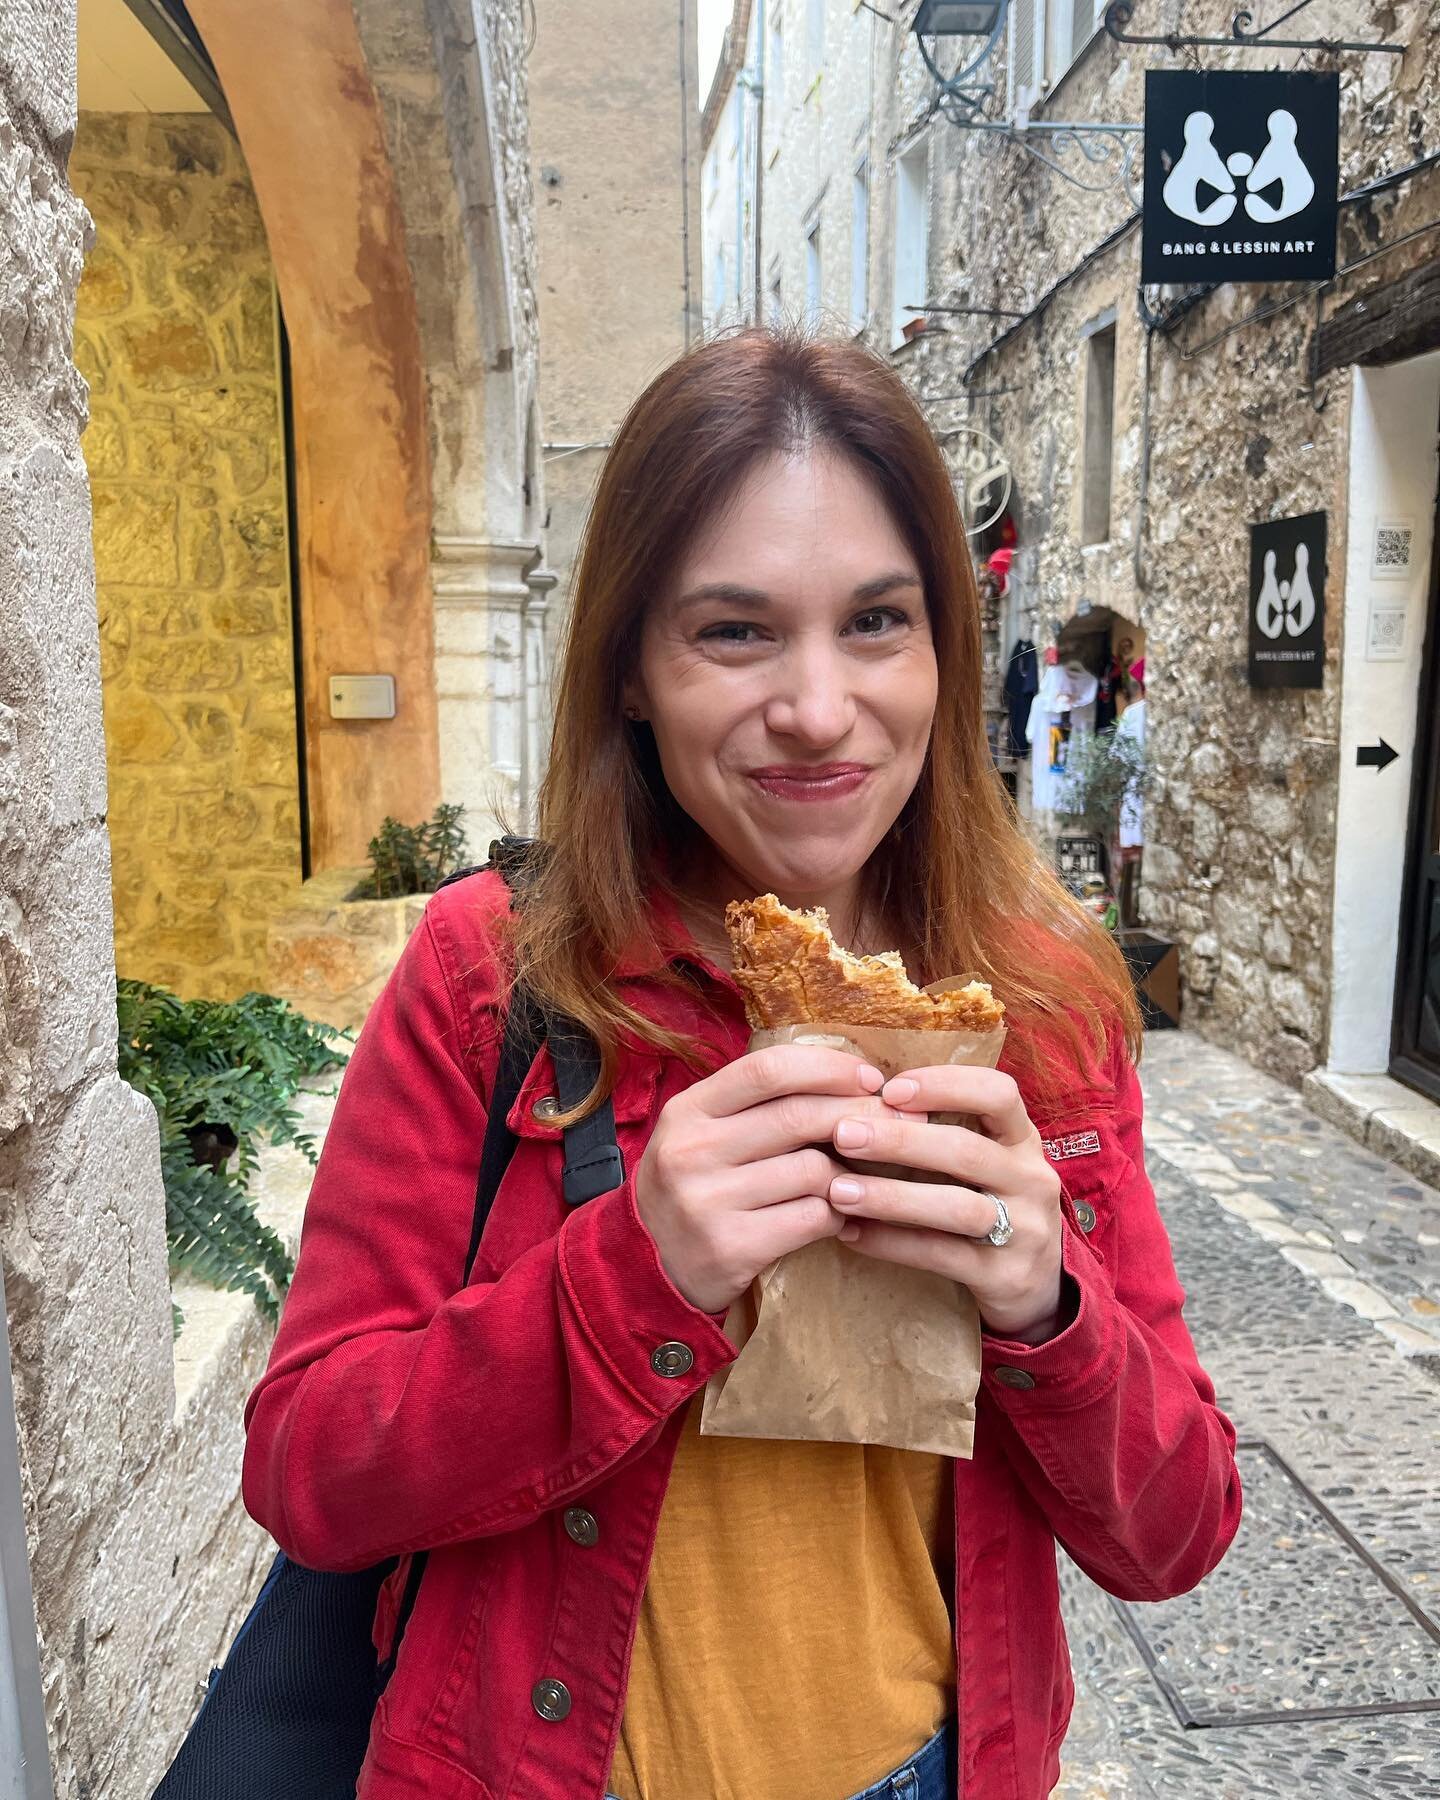 October 17, 2023: I had the best almond croissant of my life at a boulangerie in a tiny picturesque French village. Crispy, not soaked in a sugary syrup like I often get back home, perfect sweetness, so buttery. And under 2 euros. #mondieu #stpauldev